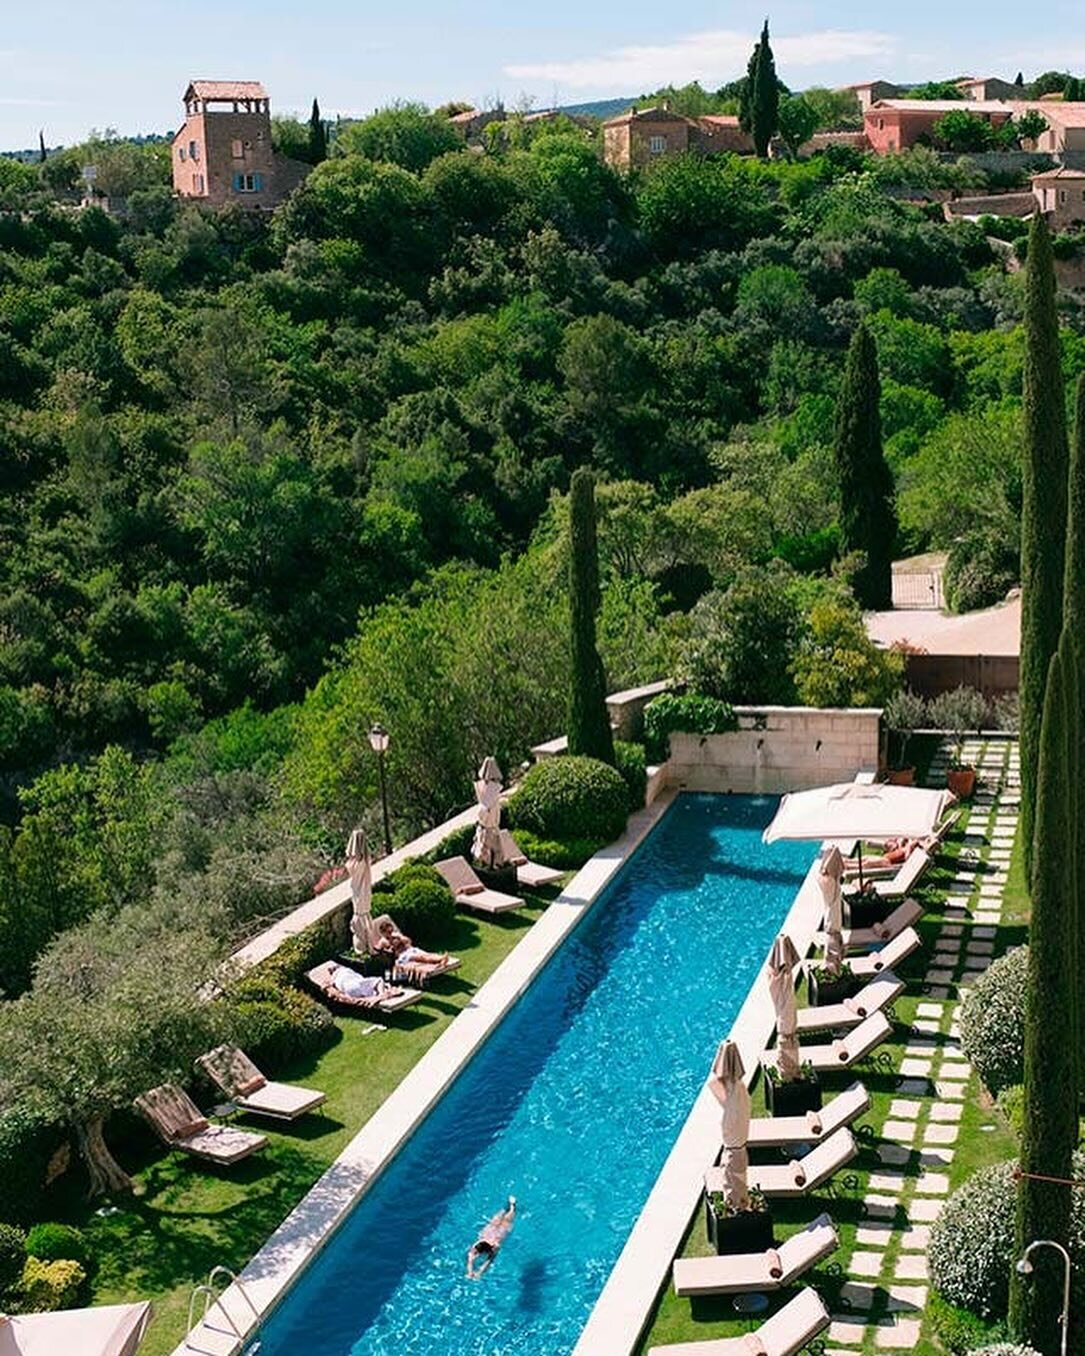 Discover Gordes, one of France&rsquo;s most beautiful villages nestled in the Luberon region. Where to stay? Don&rsquo;t miss Airelles Gordes, a gem at the heart of the historic village, that offers breathtaking views from its cliffside perch.

Whils